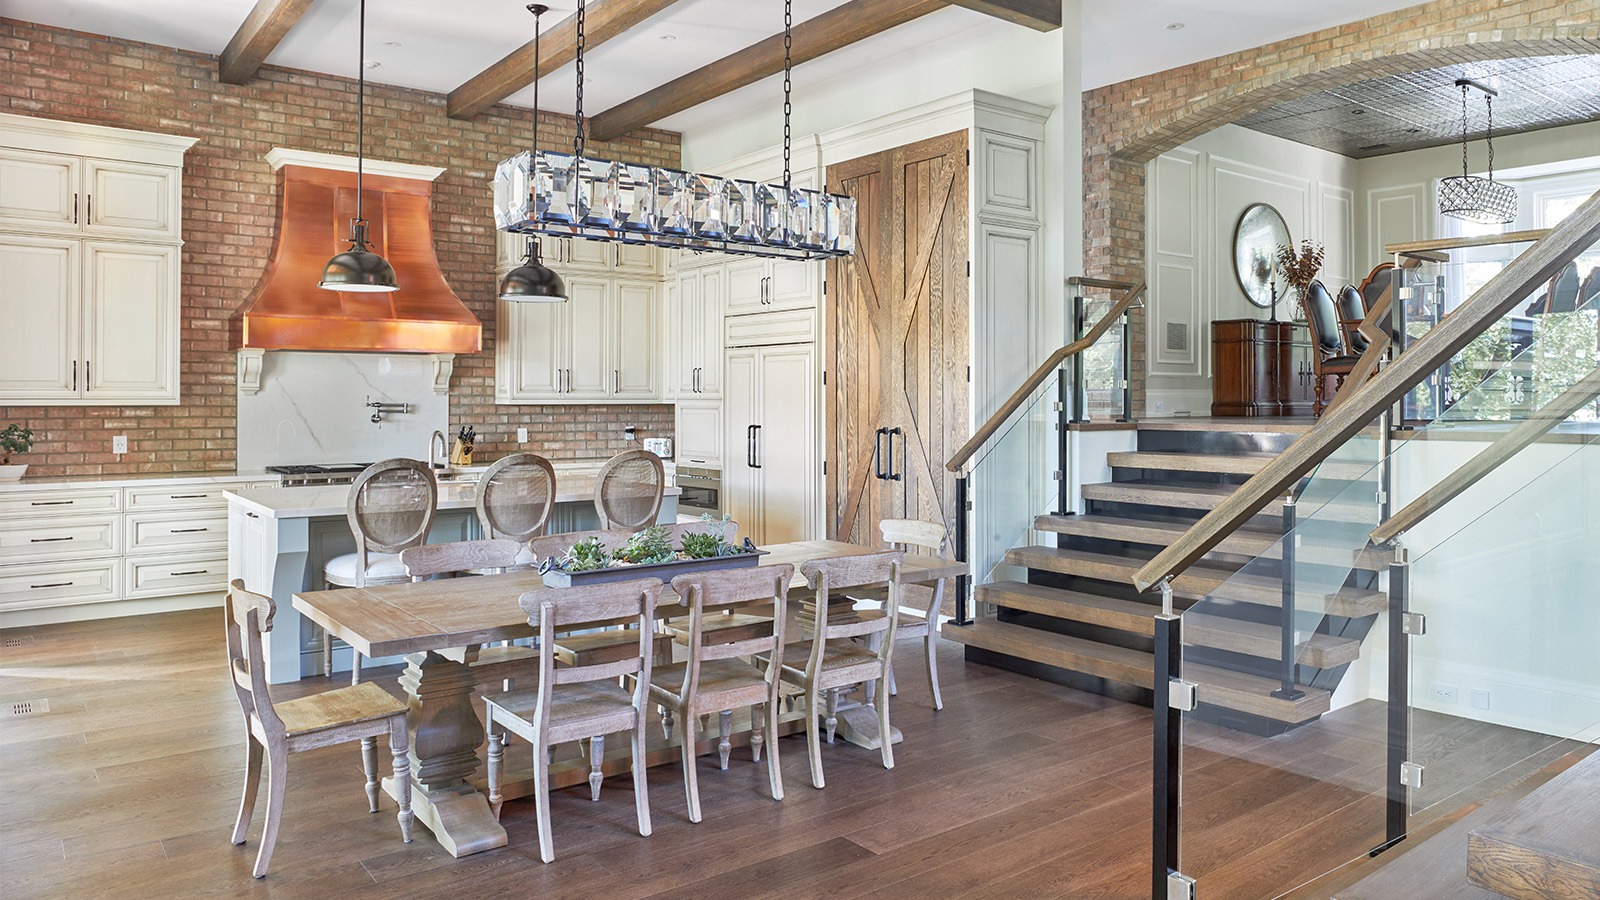 Kitchen with wood barn door, wood dining table and high ceilings.